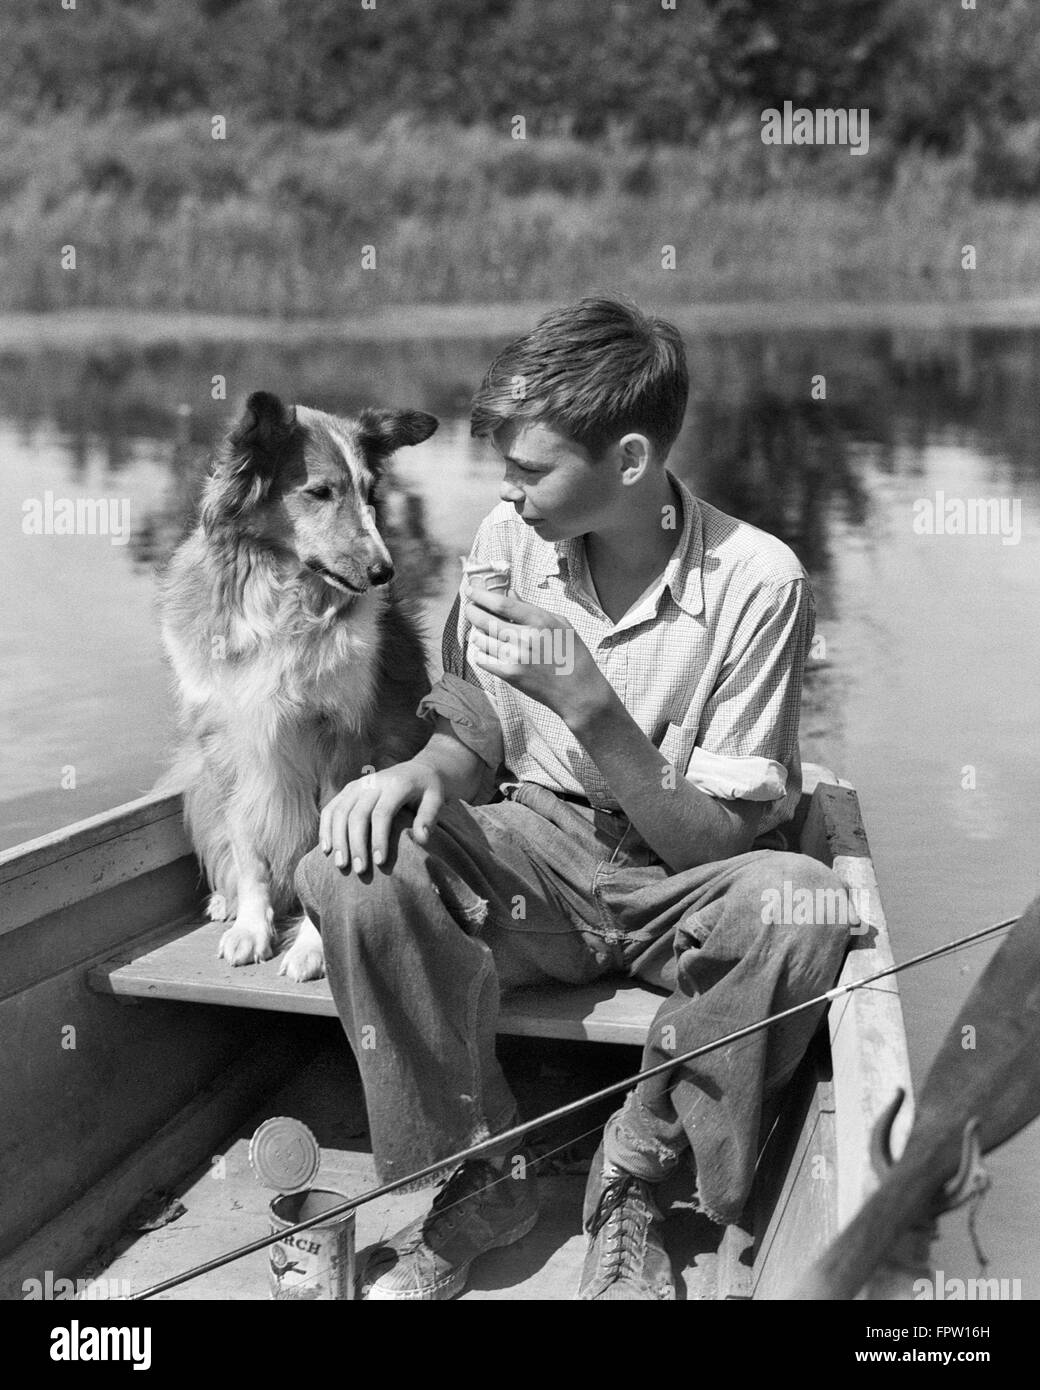 1930s BOY AND COLLIE DOG TOGETHER IN ROWBOAT WITH FISHING POLE CAN OF WORMS ON POND EATING SHARING ICE CREAM CONE Stock Photo